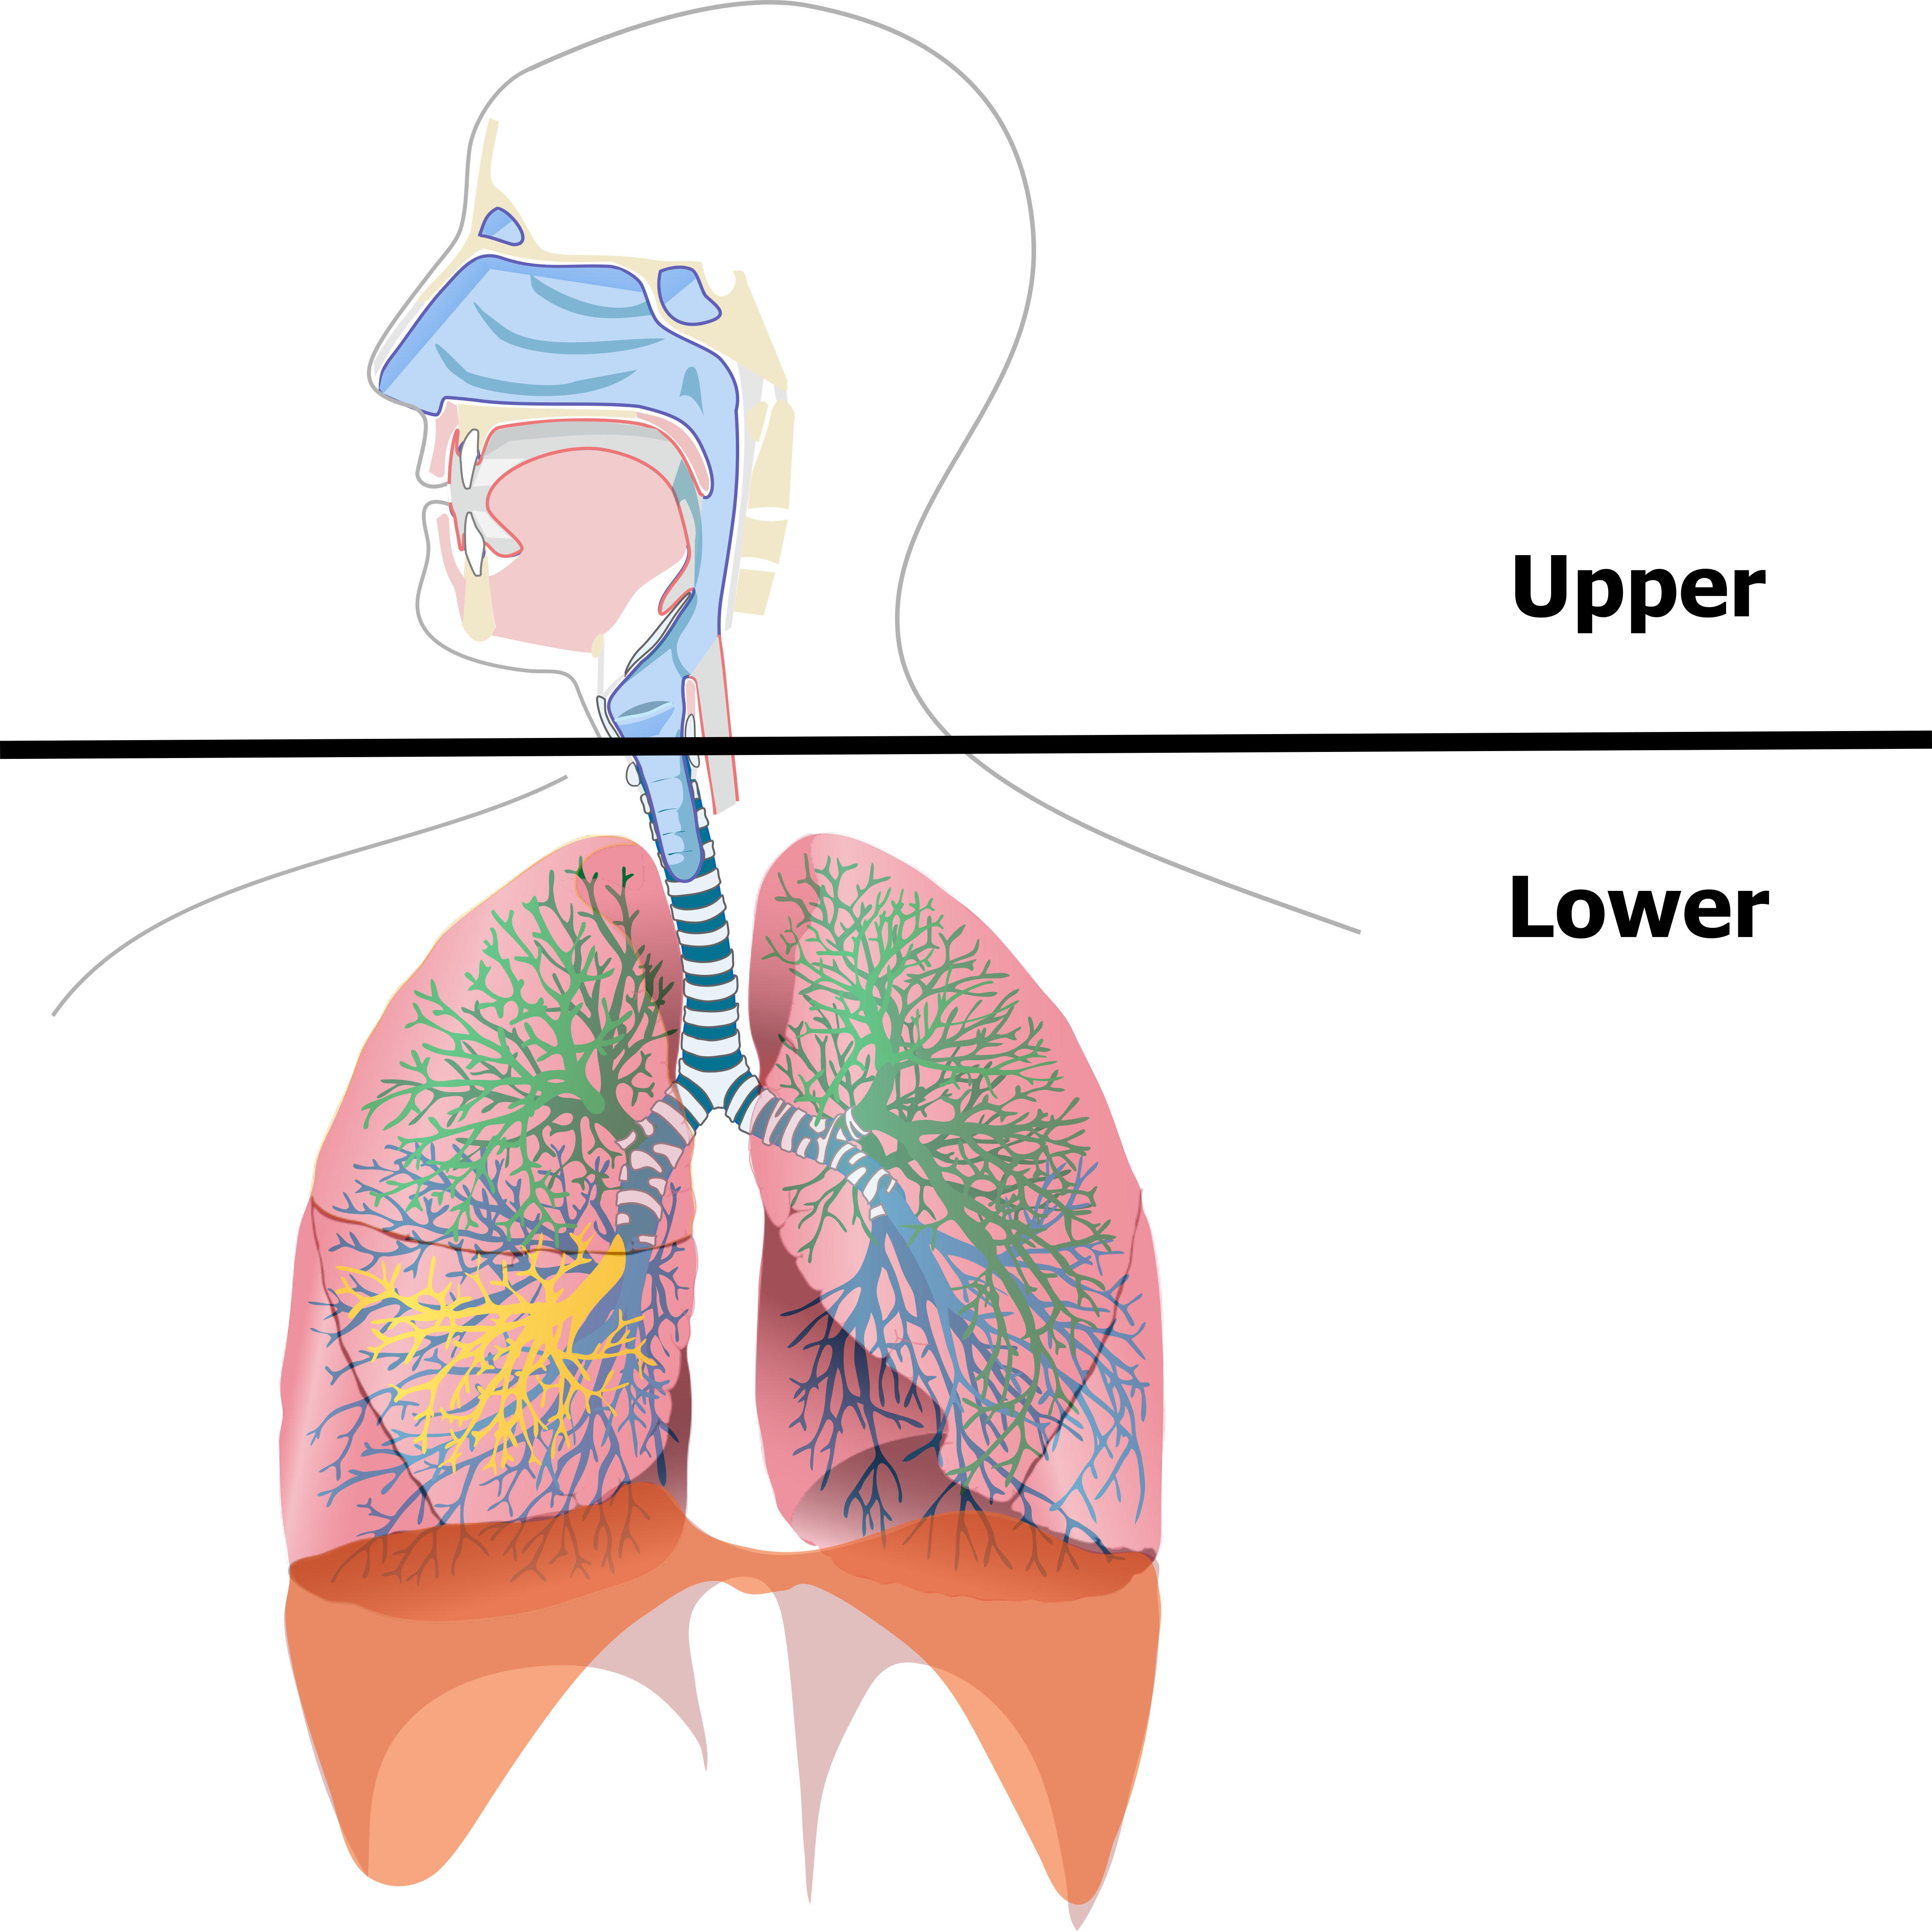 A cartoon of the airways includes the head and thorax in a coronal view. The view includes the oral and nasal cavities and the major airways leading into the lungs. A horizontal dividing line is placed at the level of the larynx. Above the line is labelled upper and below the line is labelled lower.